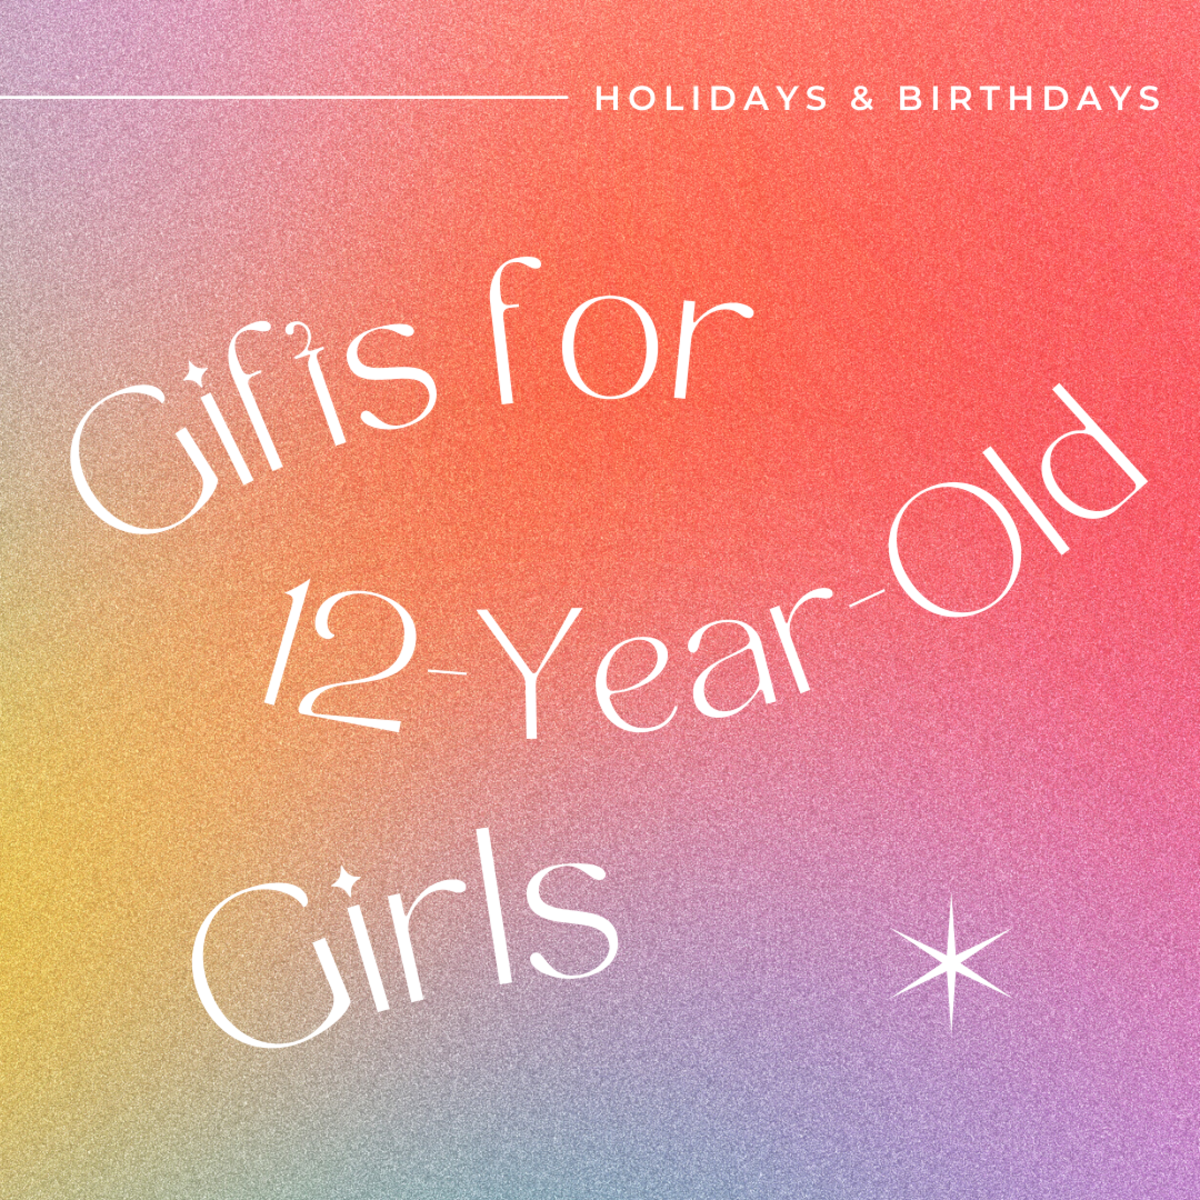 Find just the right presents for birthdays or holidays (or just because).